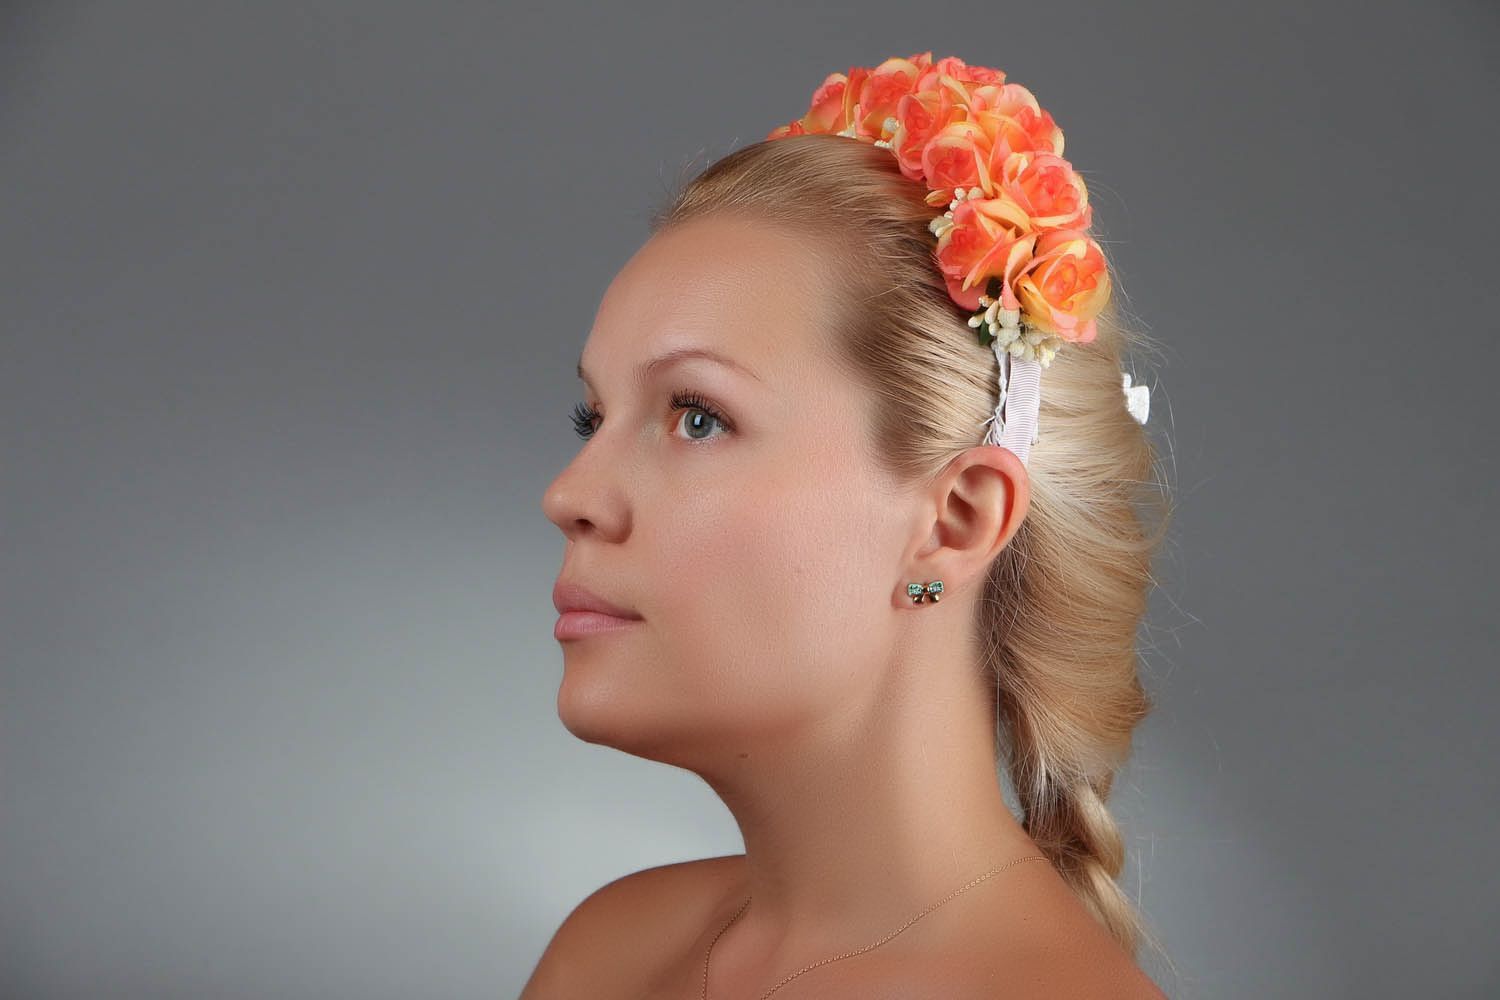 Floral hairband photo 2